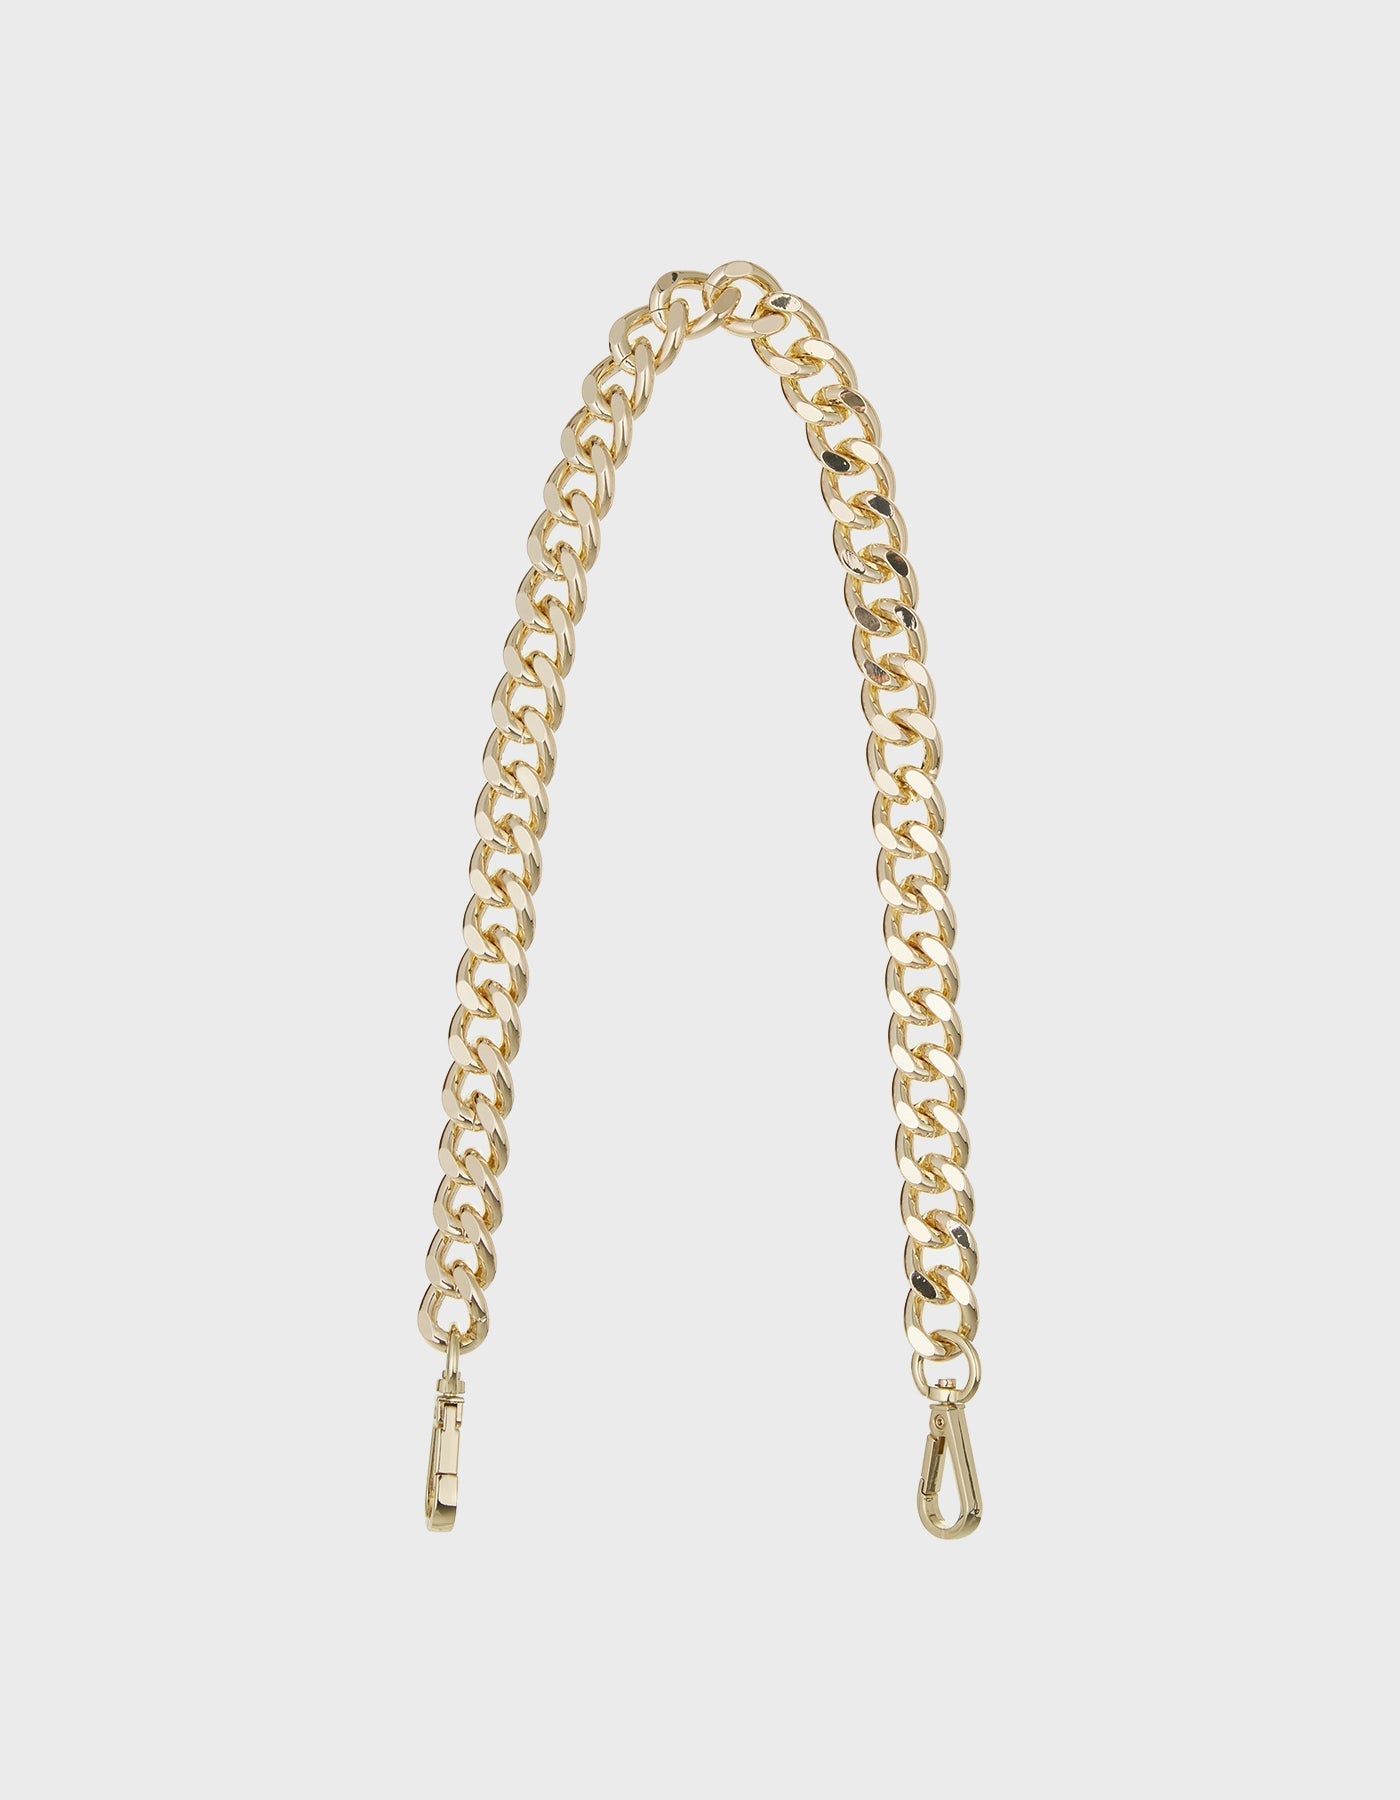 HiVa Atelier | Brass Thick Gold Shoulder Strap Thick | Beautiful and Versatile